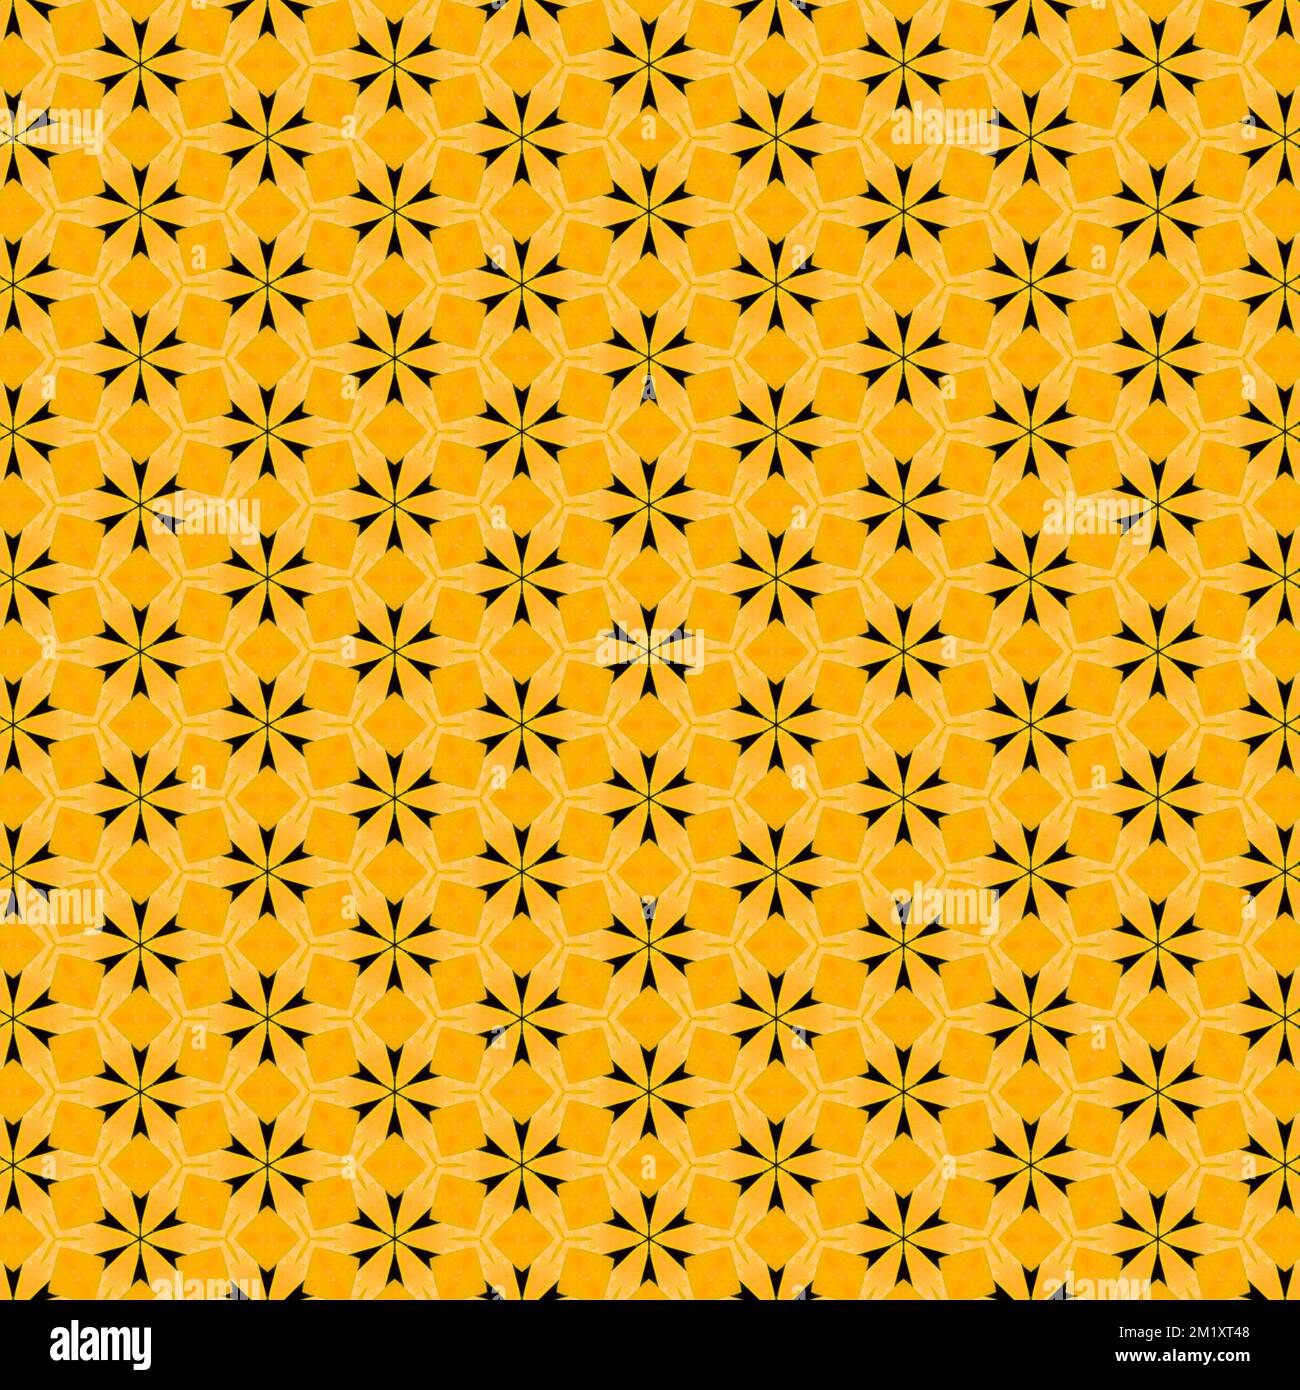 Repeating seamless pattern with black and gold star shaped design for the Christmas holiday. Colours are also perfect for fall, spring, summer. Stock Photo